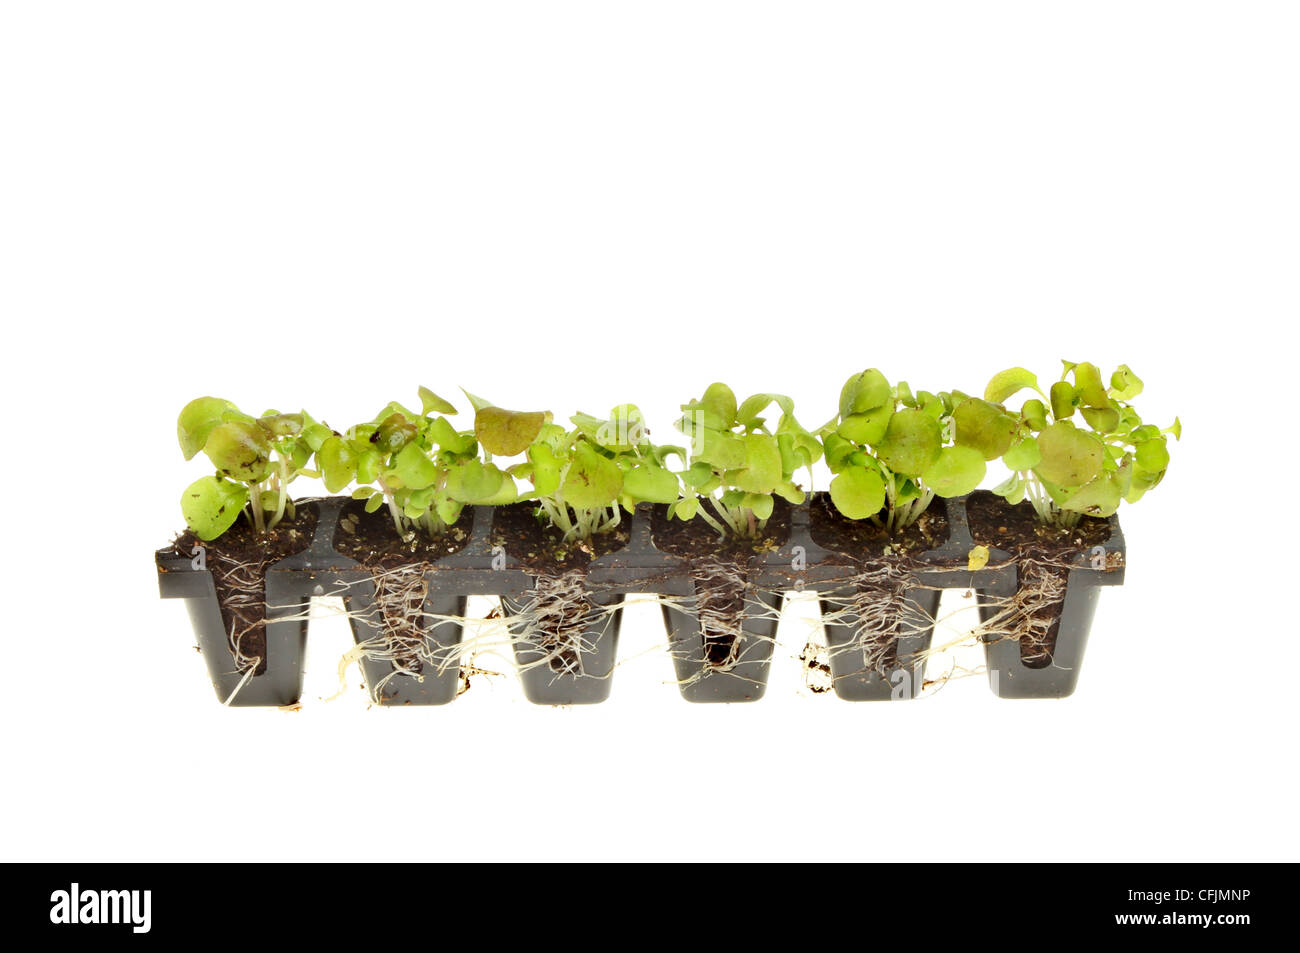 Strip of rooted seedling plug plants isolated against white Stock Photo